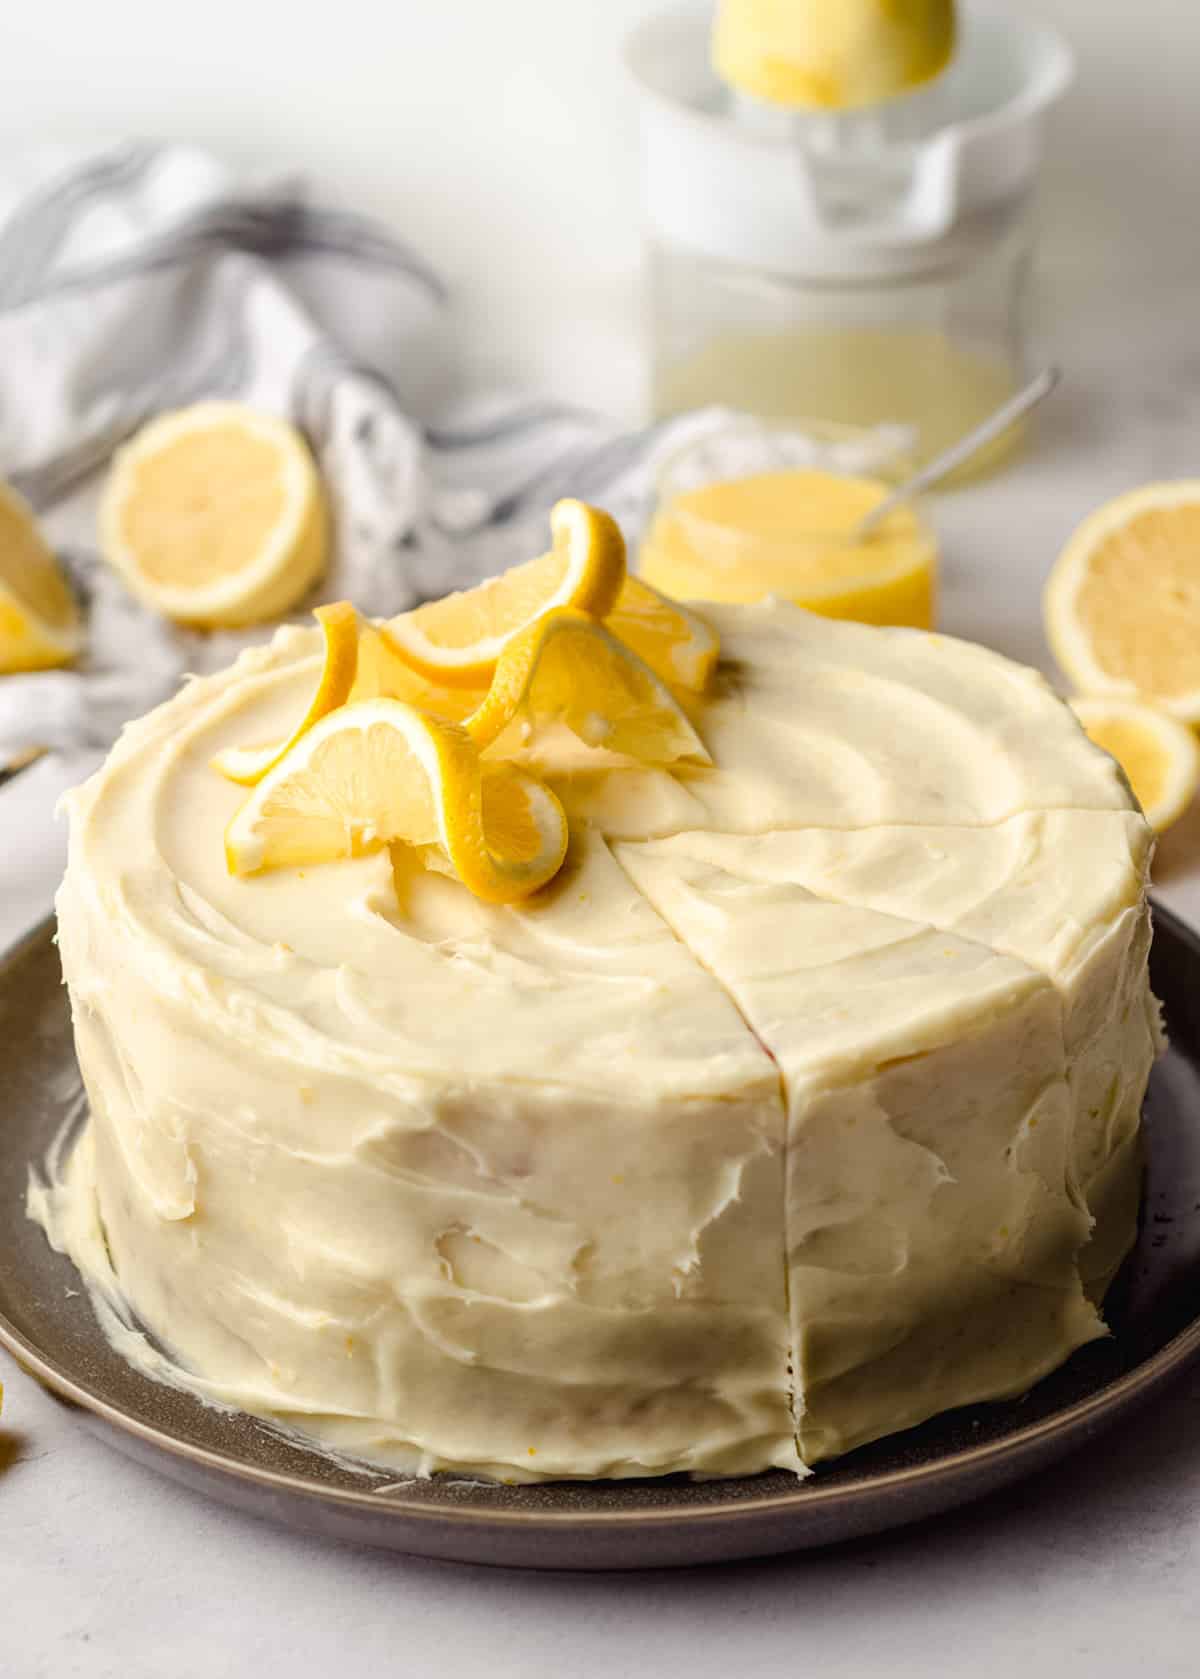 A large lemon cake decorated with lemon slices, with small wedges scored.